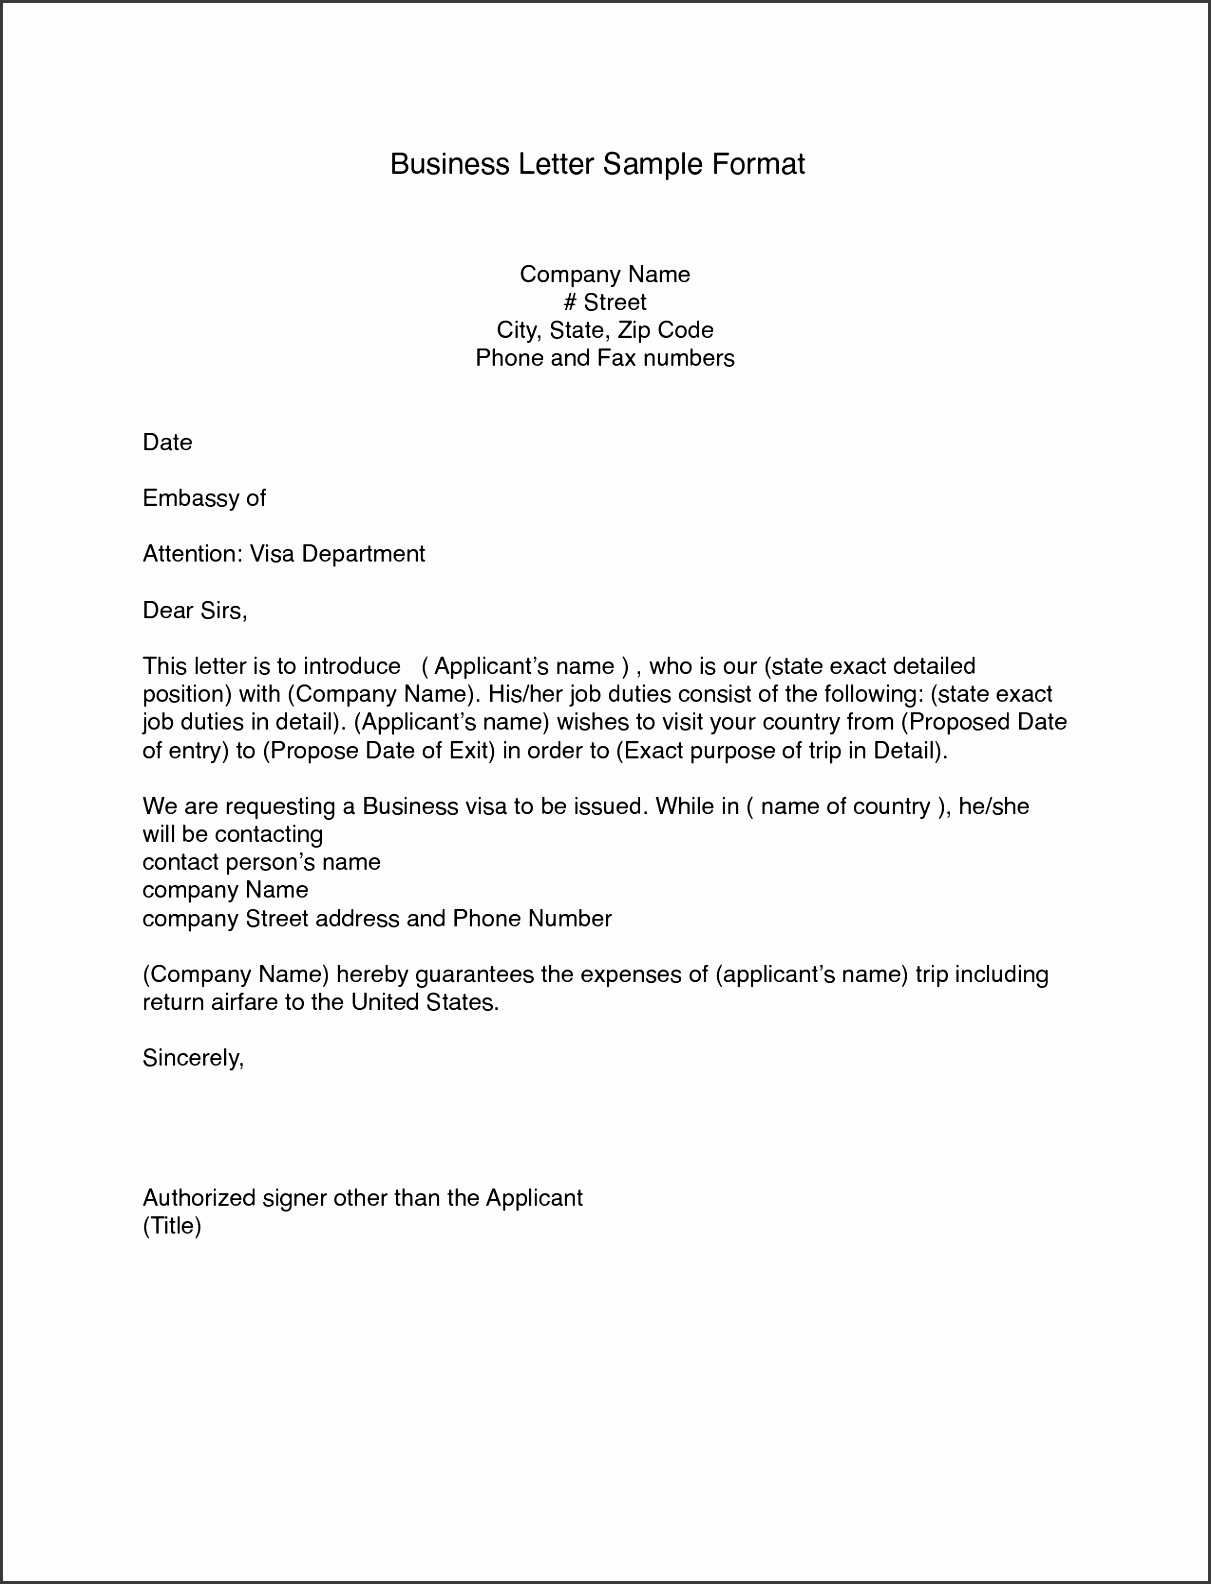 Sample Business Letter Format Example